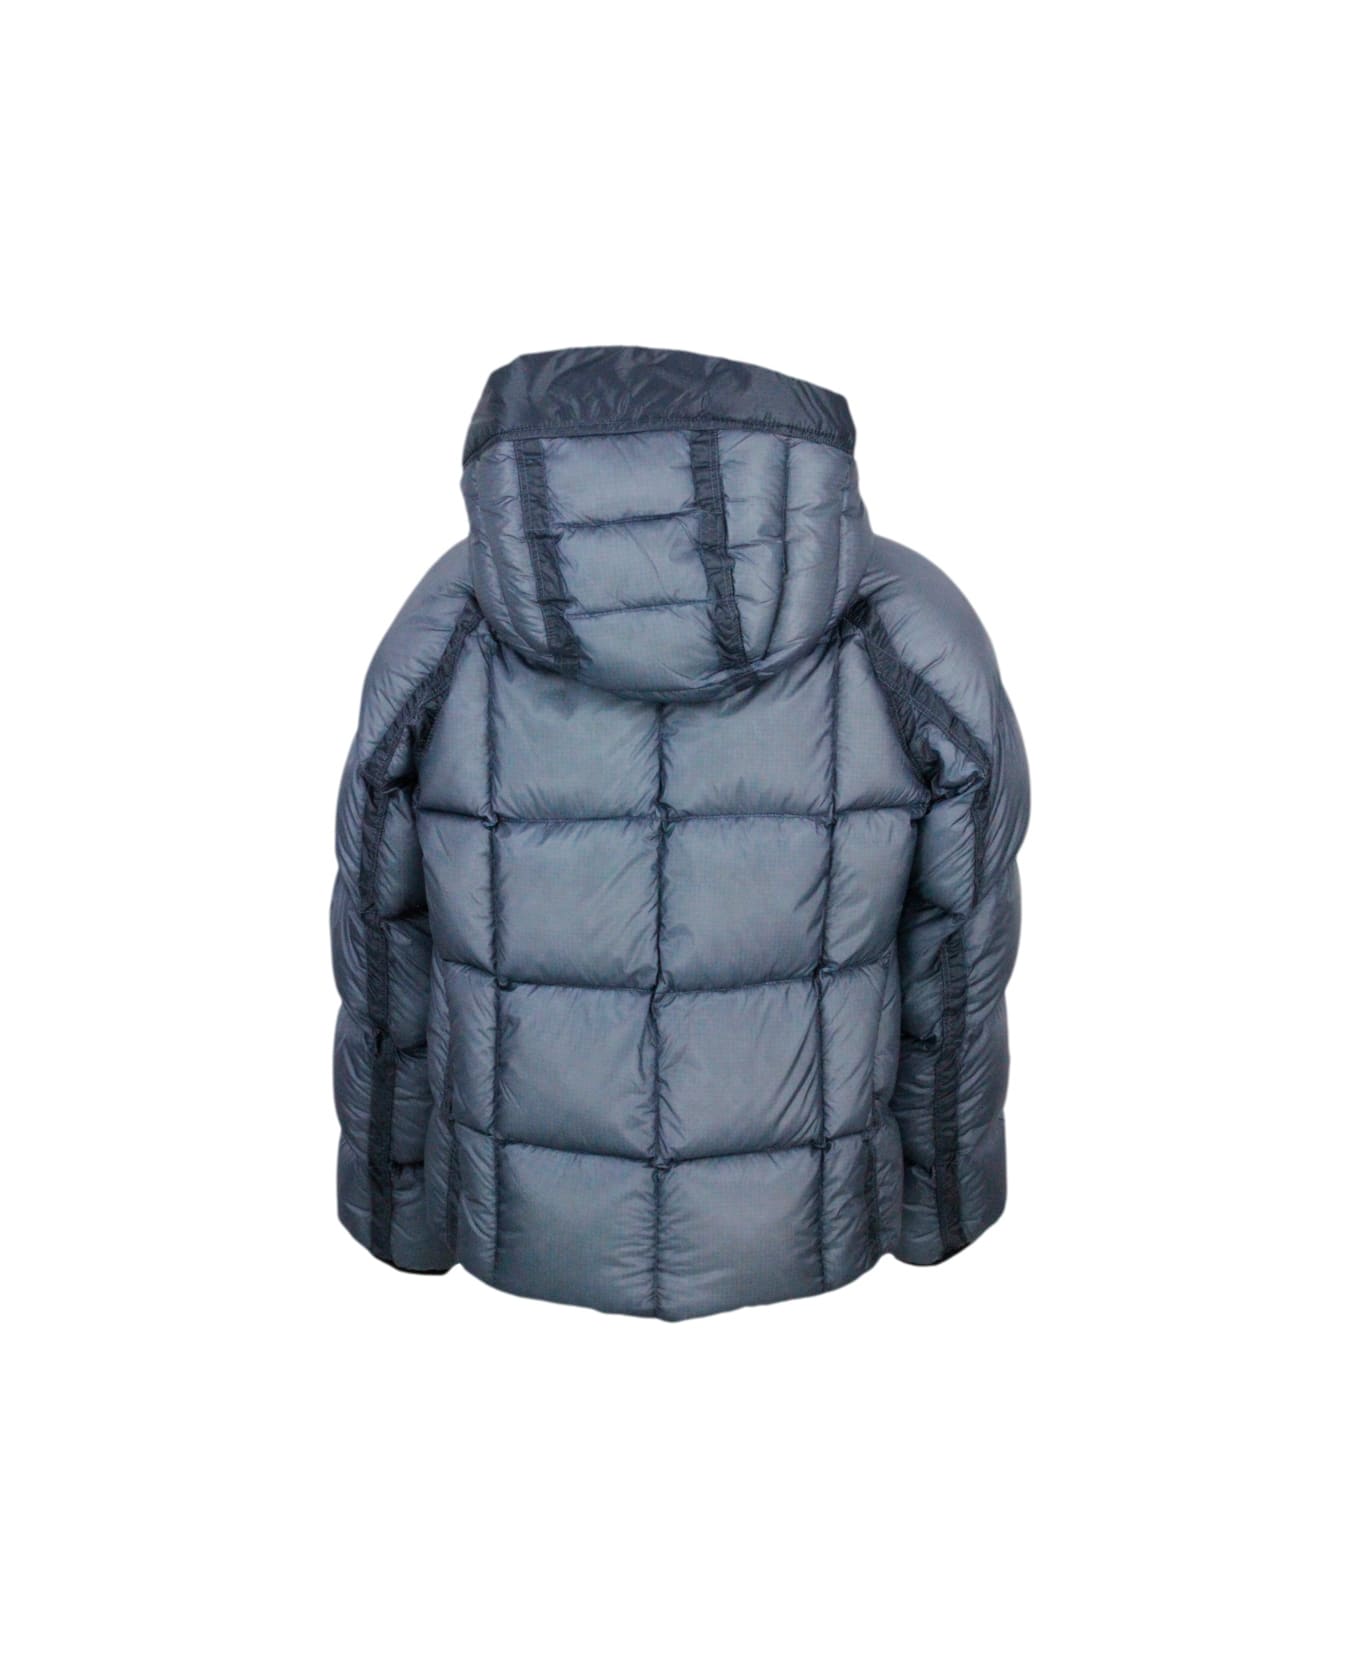 C.P. Company Dd Shell Down Jacket In Real Goose Down In Ultralight Fabric With Checkered Texture. - Blu